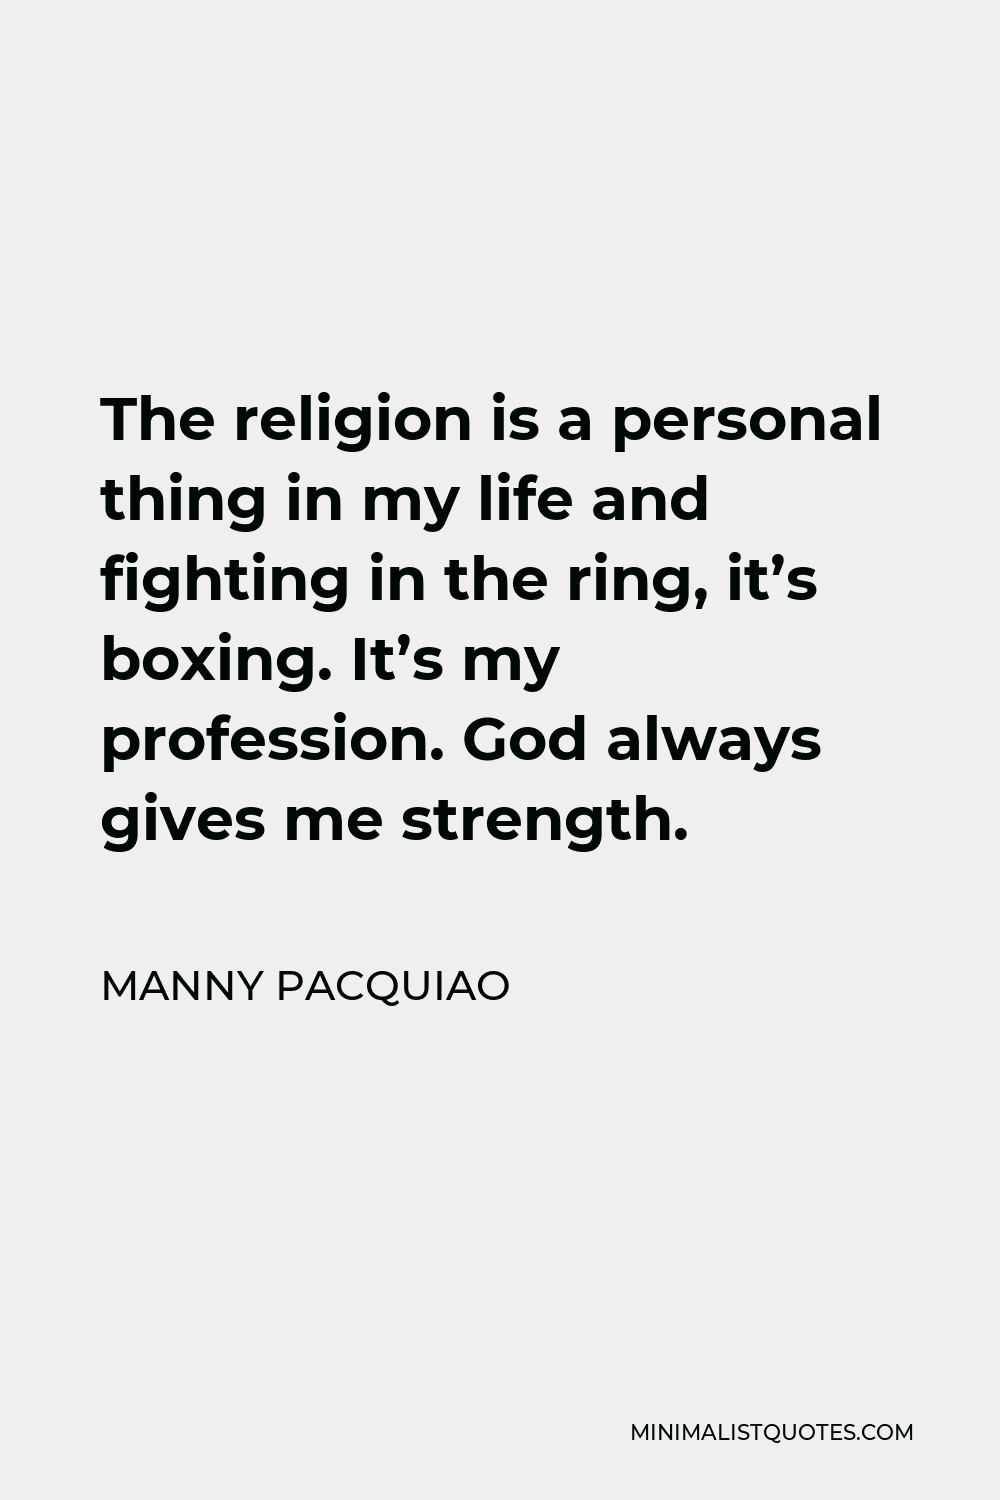 Manny Pacquiao Quote - The religion is a personal thing in my life and fighting in the ring, it’s boxing. It’s my profession. God always gives me strength.